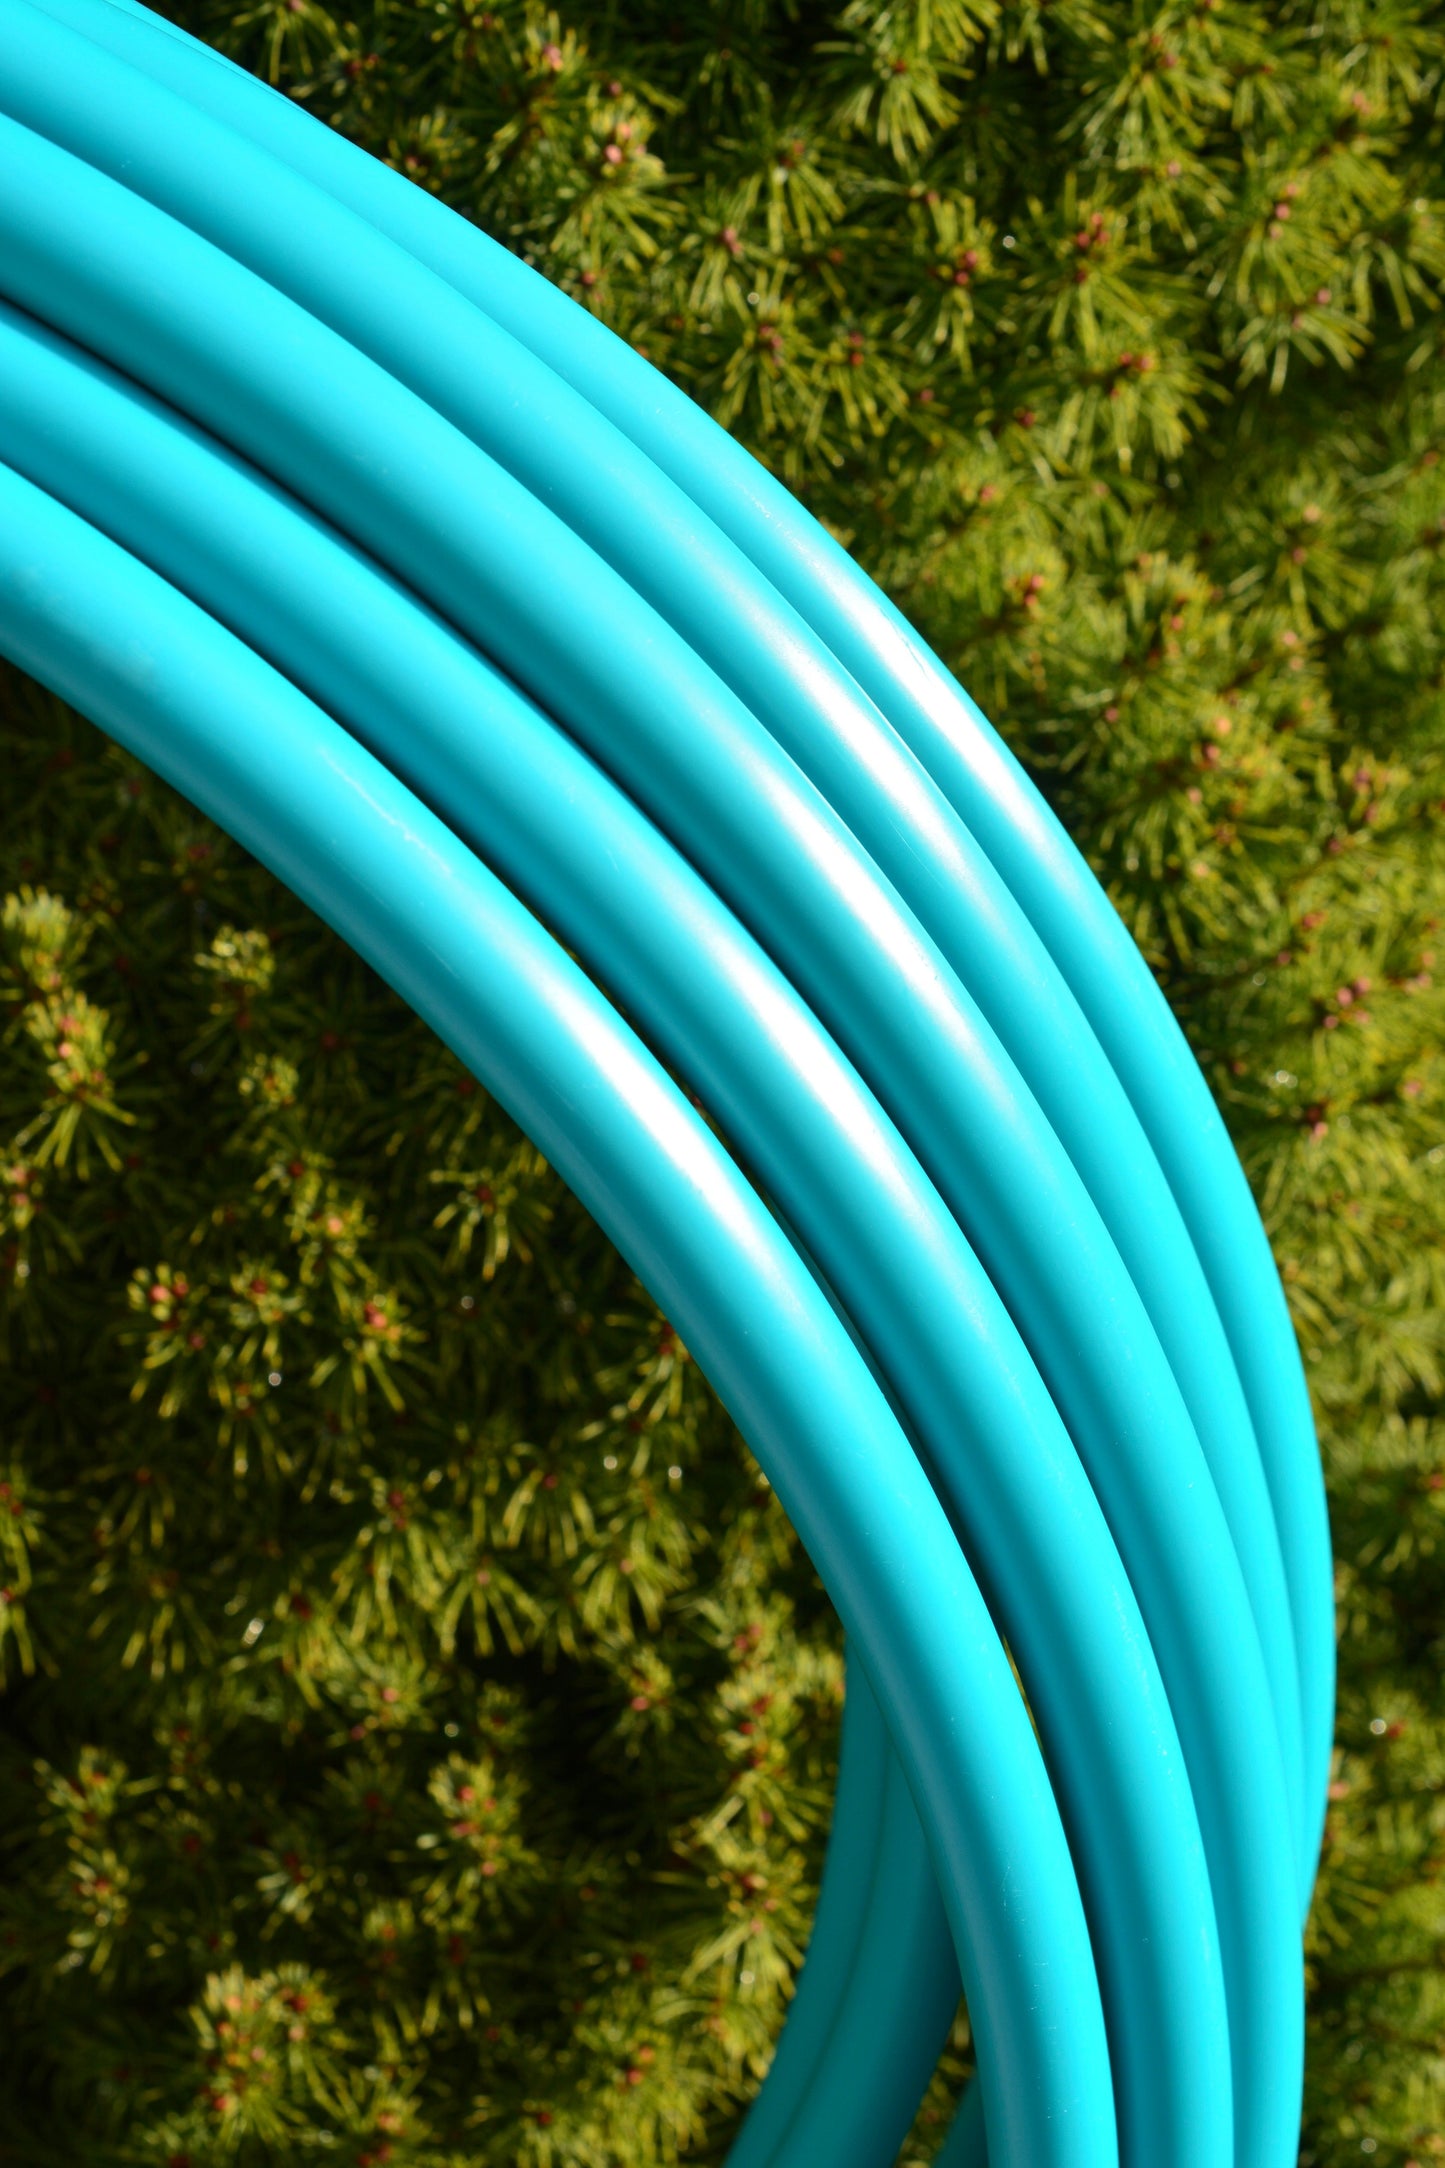 5/8 Retro Teal Colored Polypro Hoops